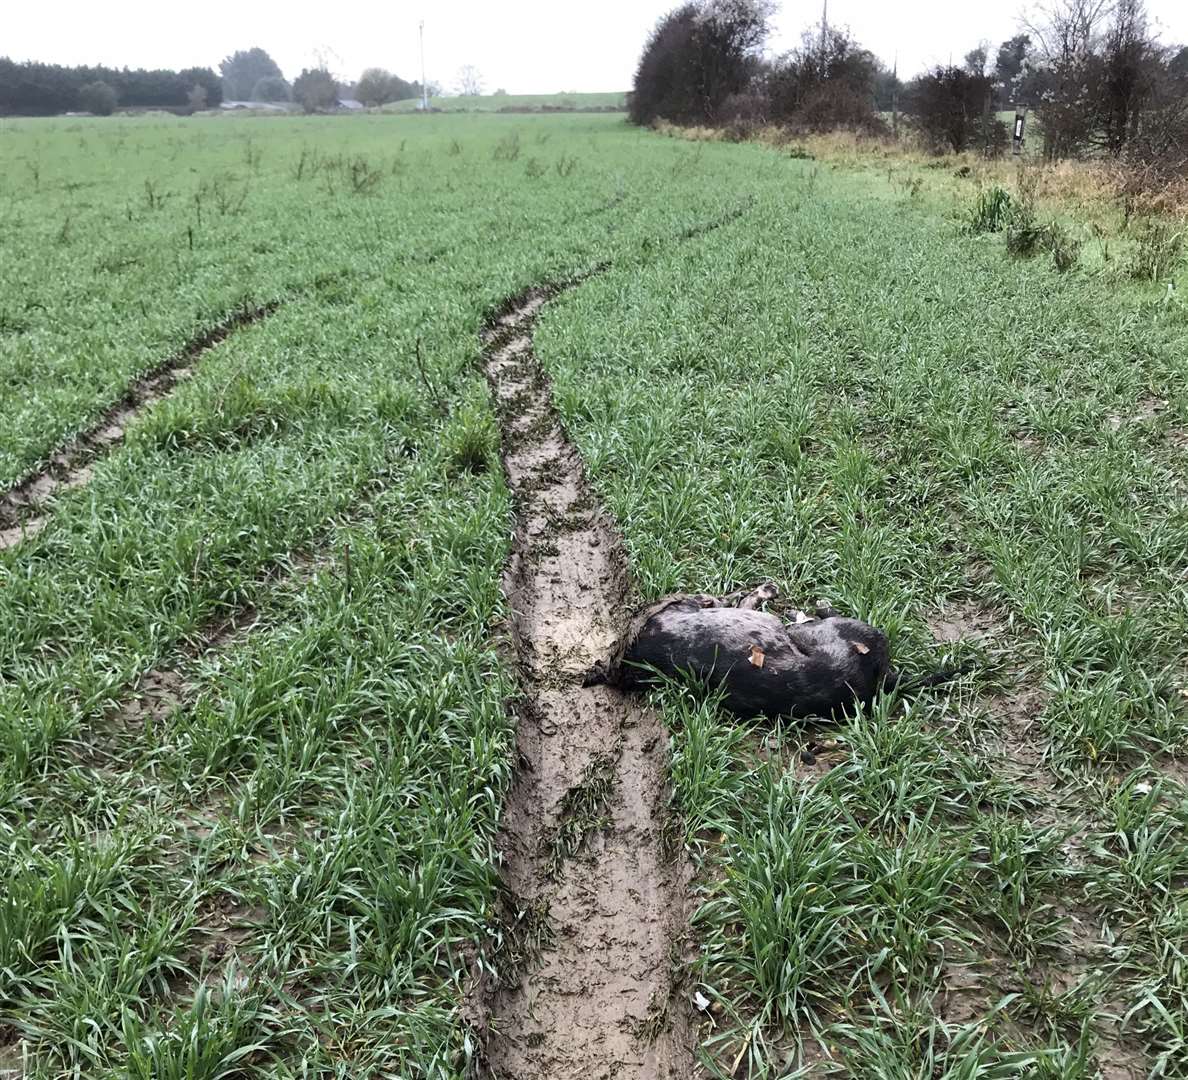 A lurcher dog was found dead and dumped in a muddy field off Nursted Lane near Gravesend in horrific circumstances with evidence he had been driven over. Picture: RSPCA